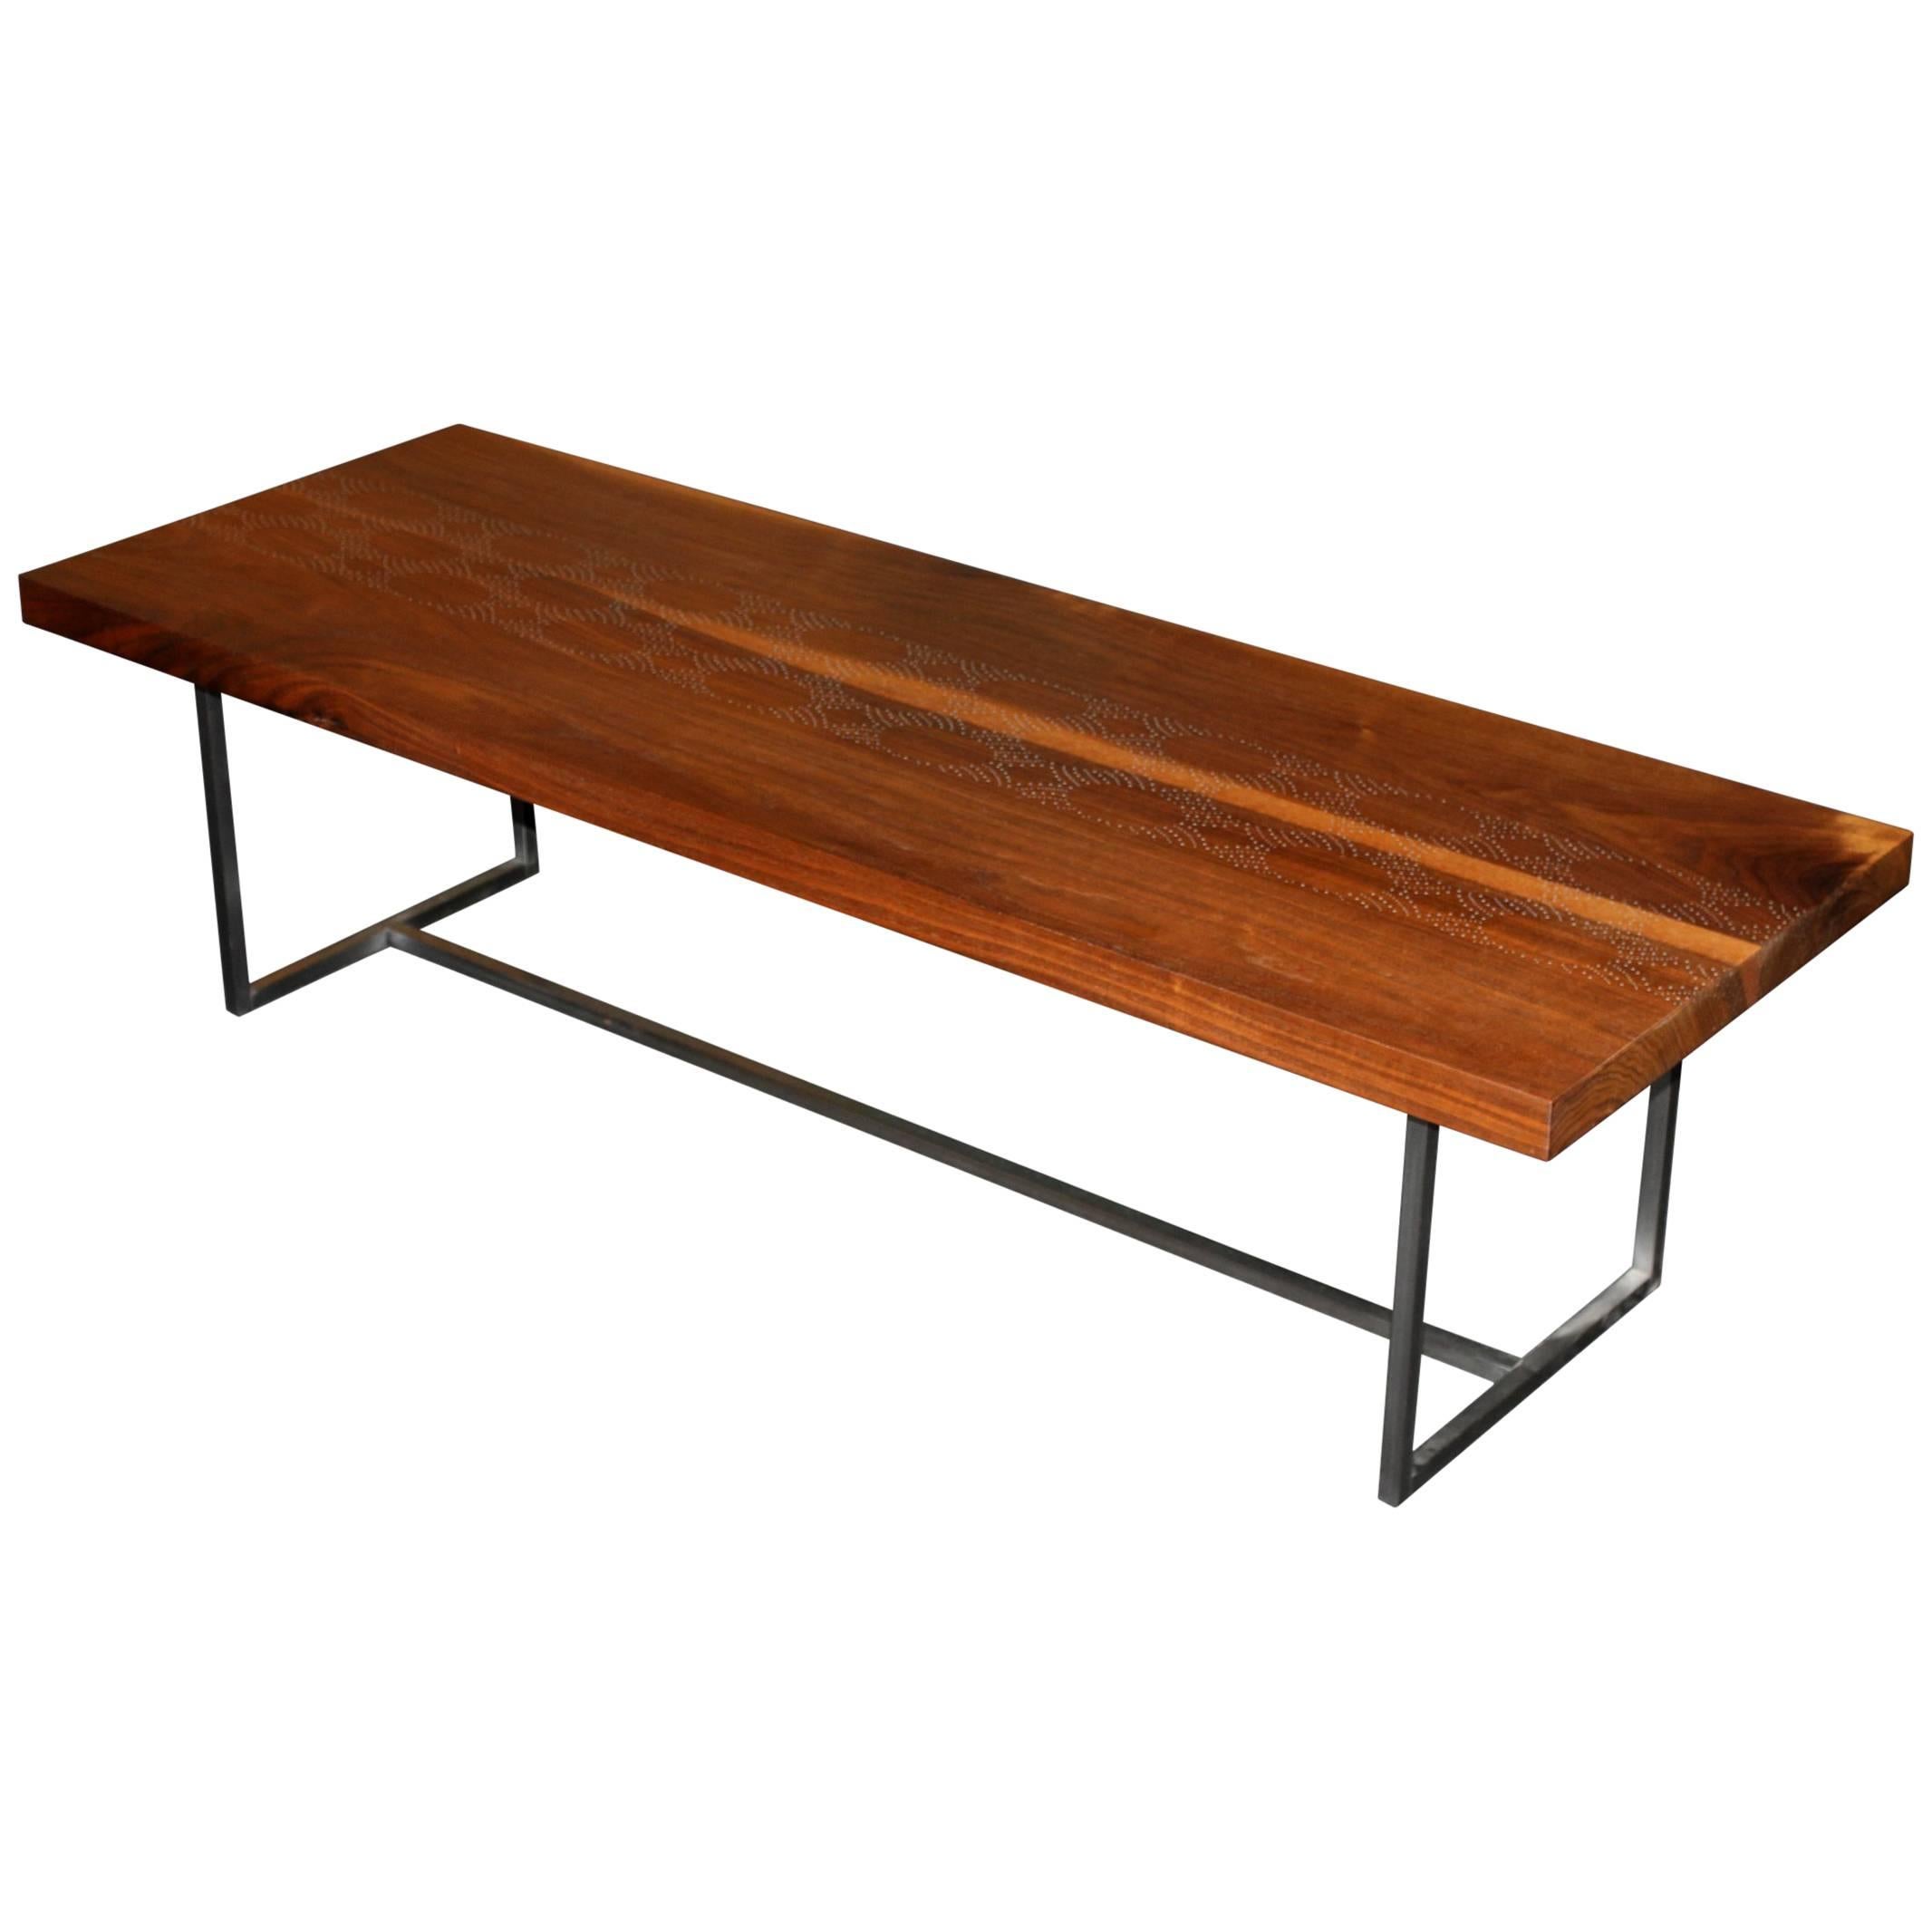 Peter Sandback Modernist Low Rectangle Nail Table in Walnut and Steel